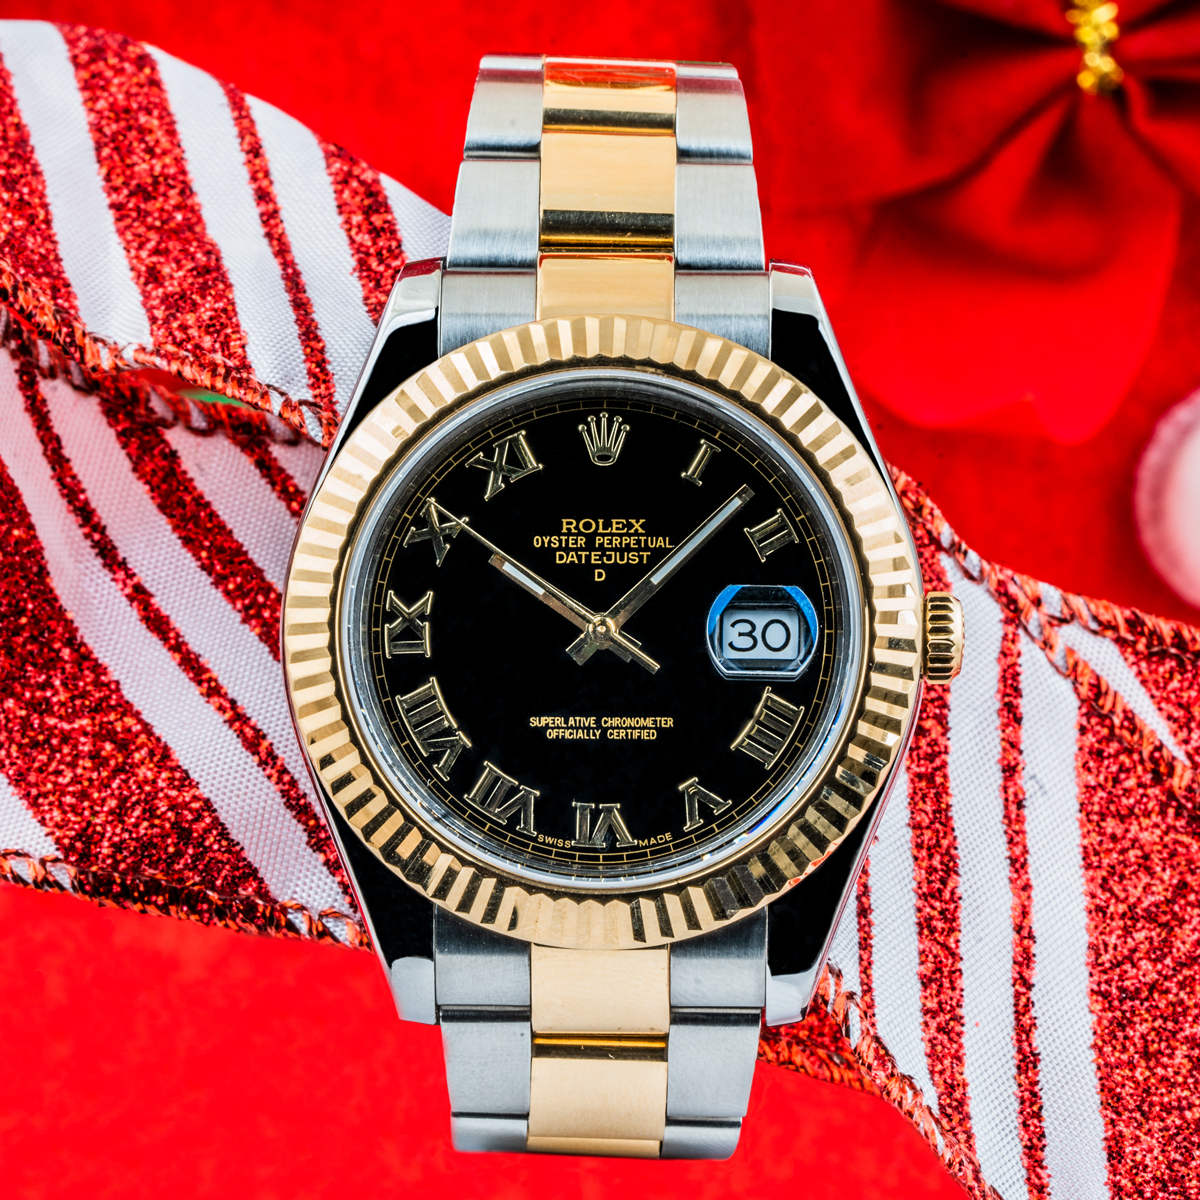 Pre-owned men's Rolex Datejust in yellow gold and stainless steel with a black Roman numeral dial.